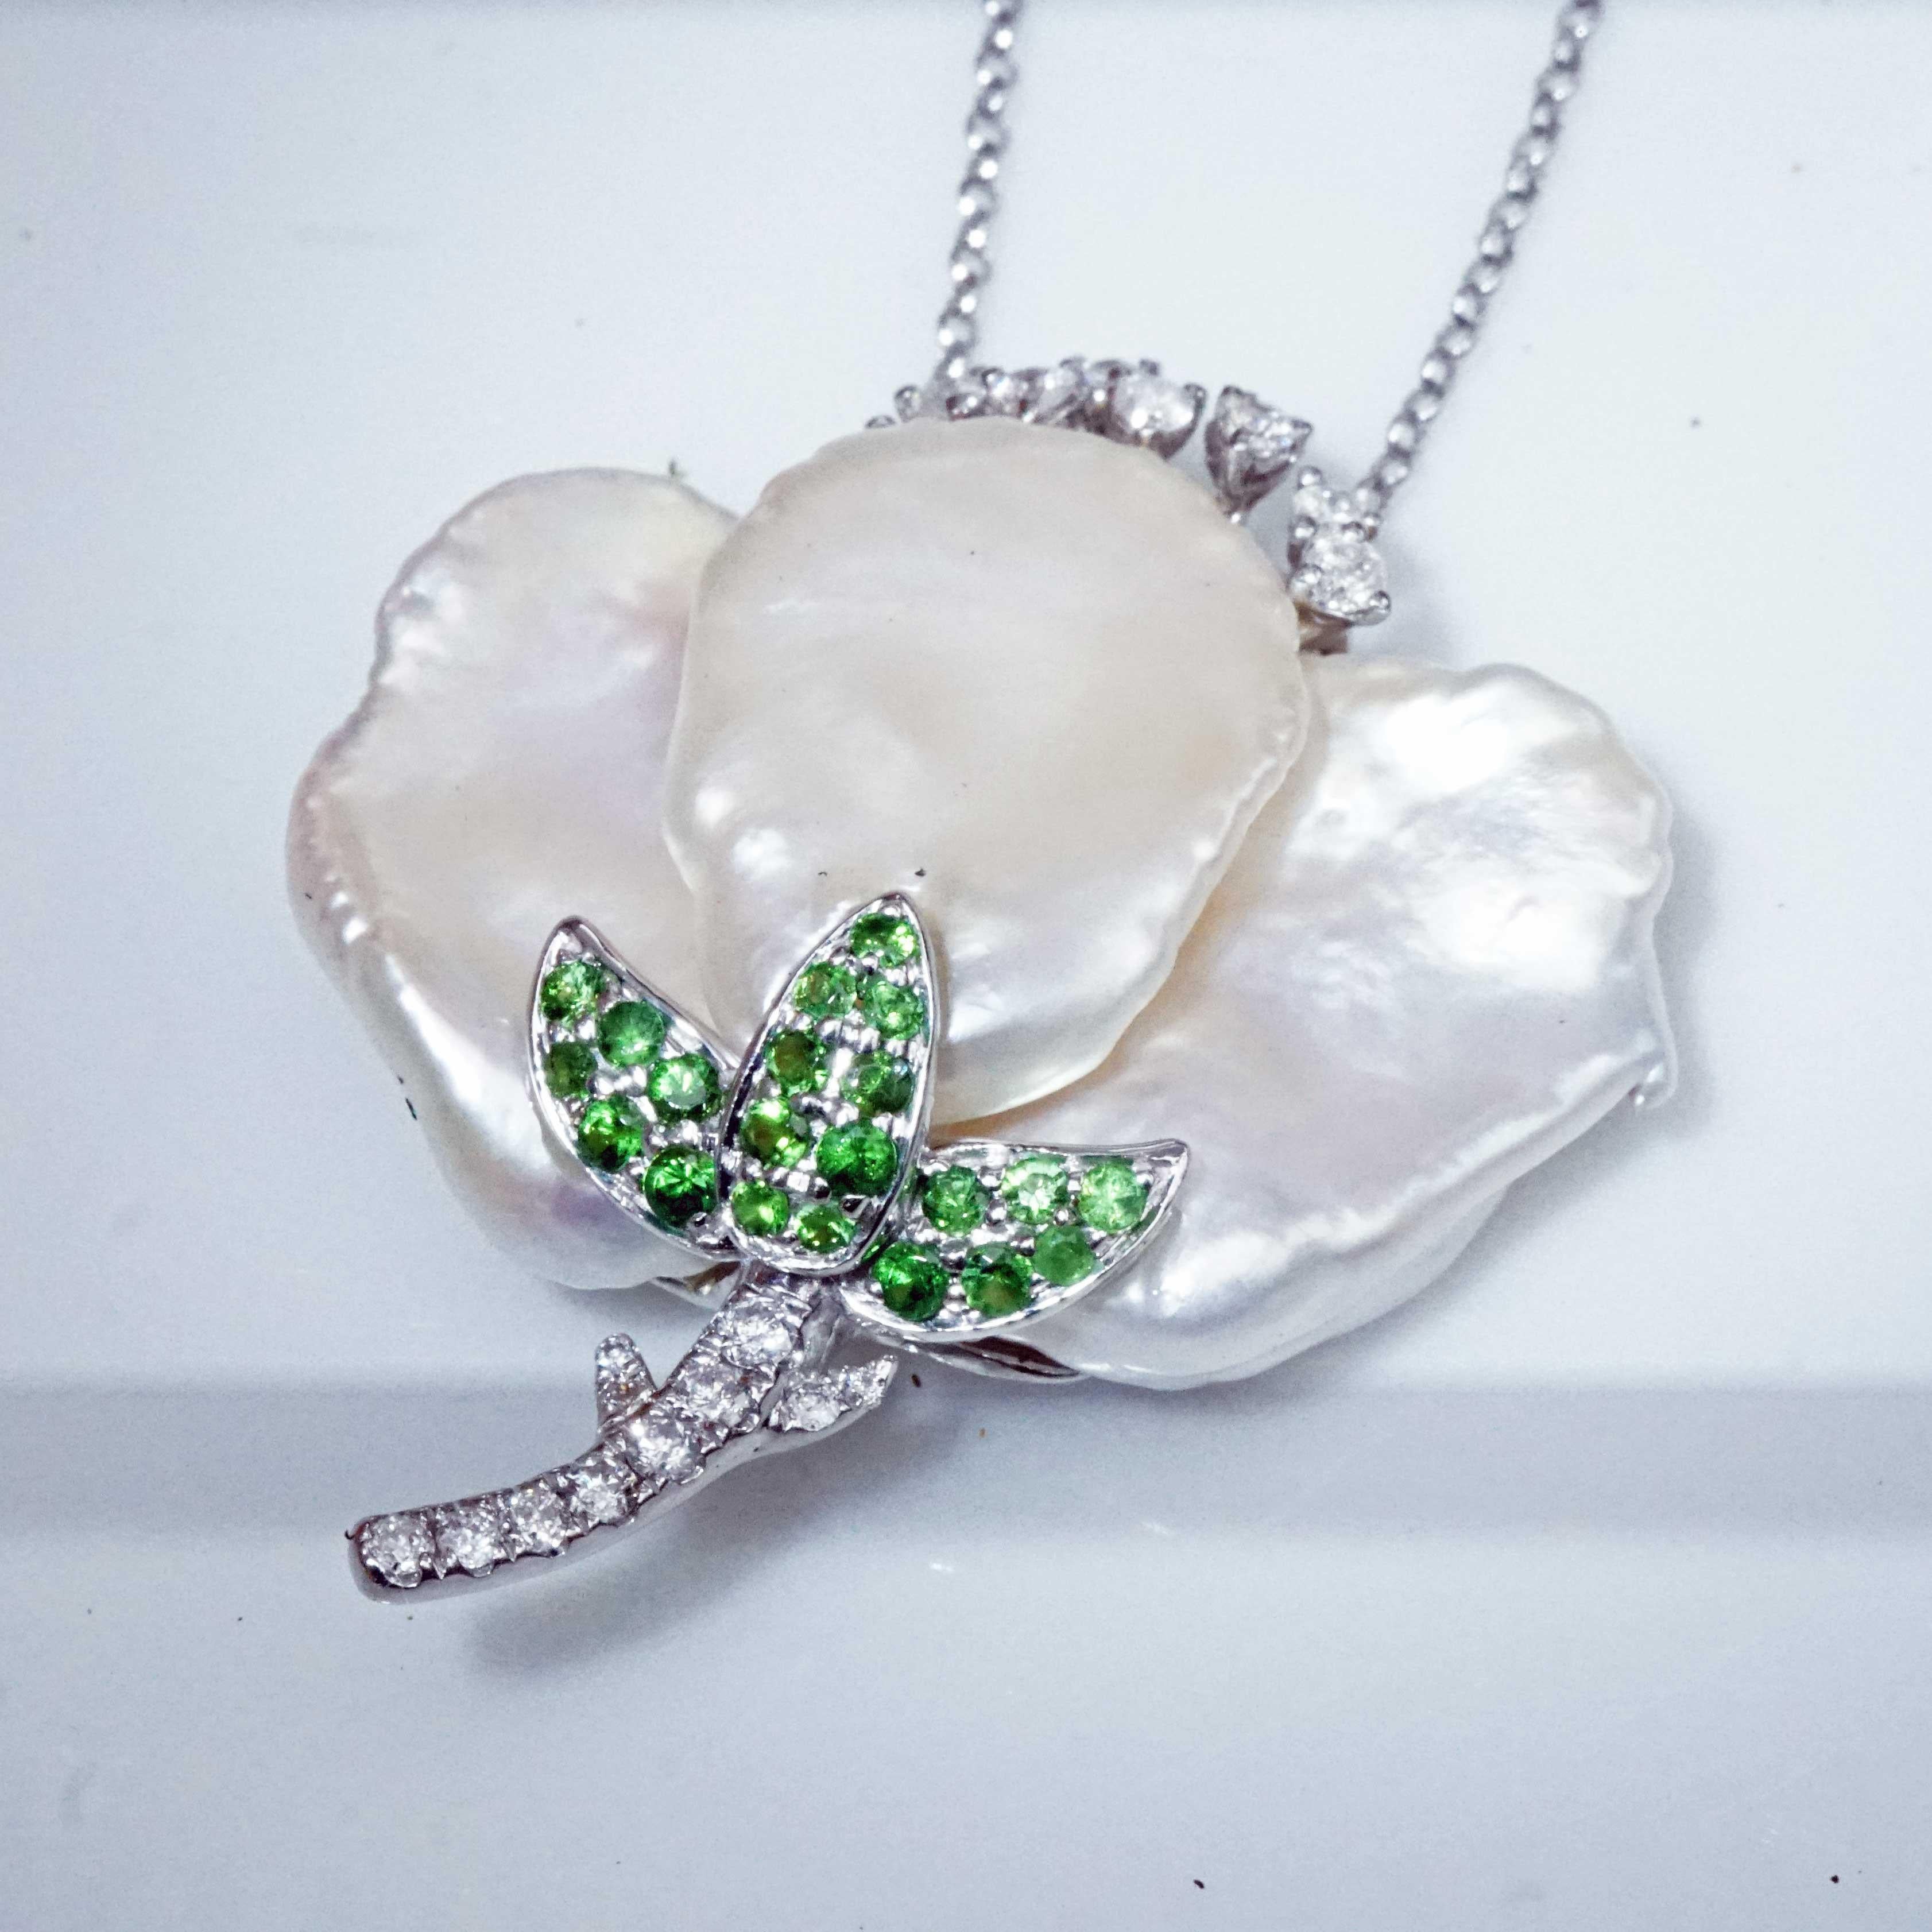 this flower will never wither frozen forever precious flower design made of three-part white freshwater pearl in fine quality, frame and flower stem set in 750 white gold and decorated with fine green tsavorites totaling approx. 0.30 ct and full-cut